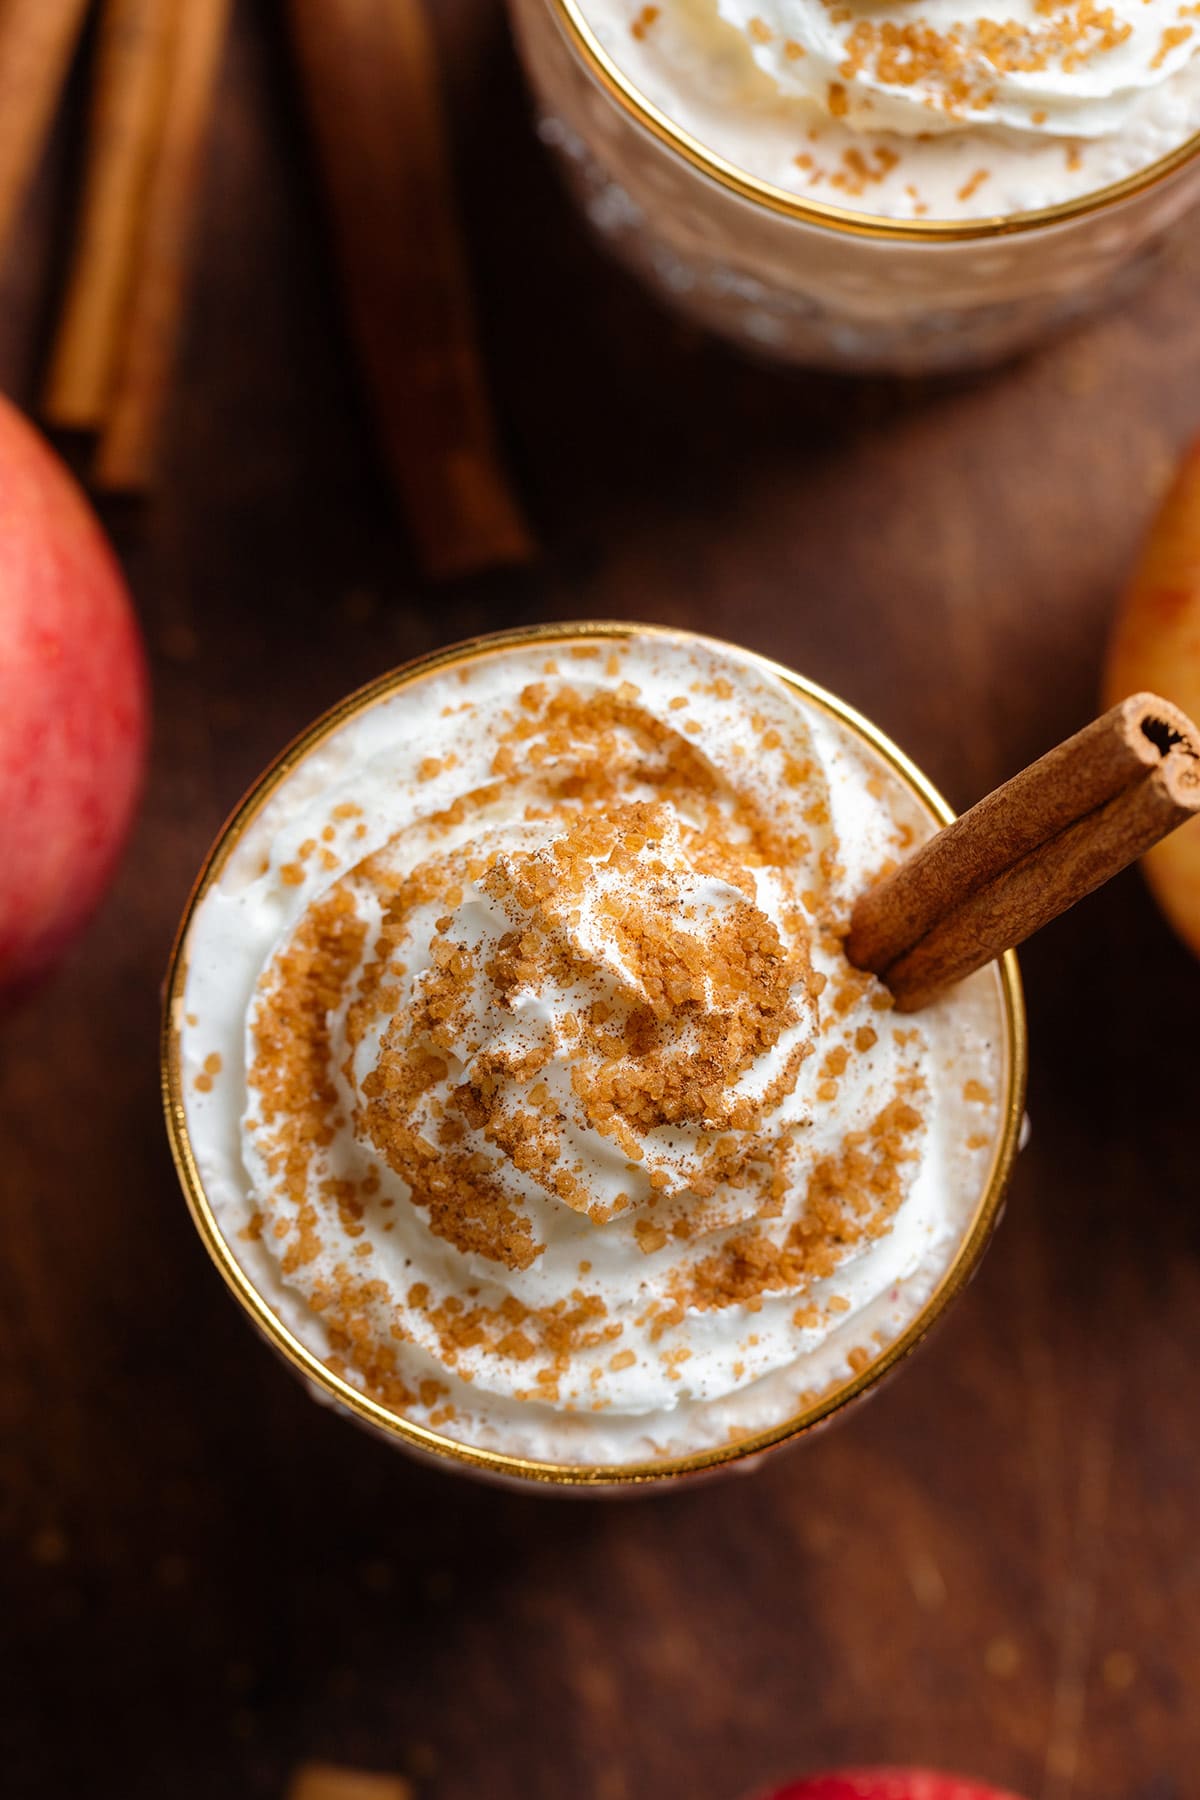 Apple pie smoothie with whipped cream and spiced sugar on top in a short glass with a gold rim garnished with a stick of cinnamon.